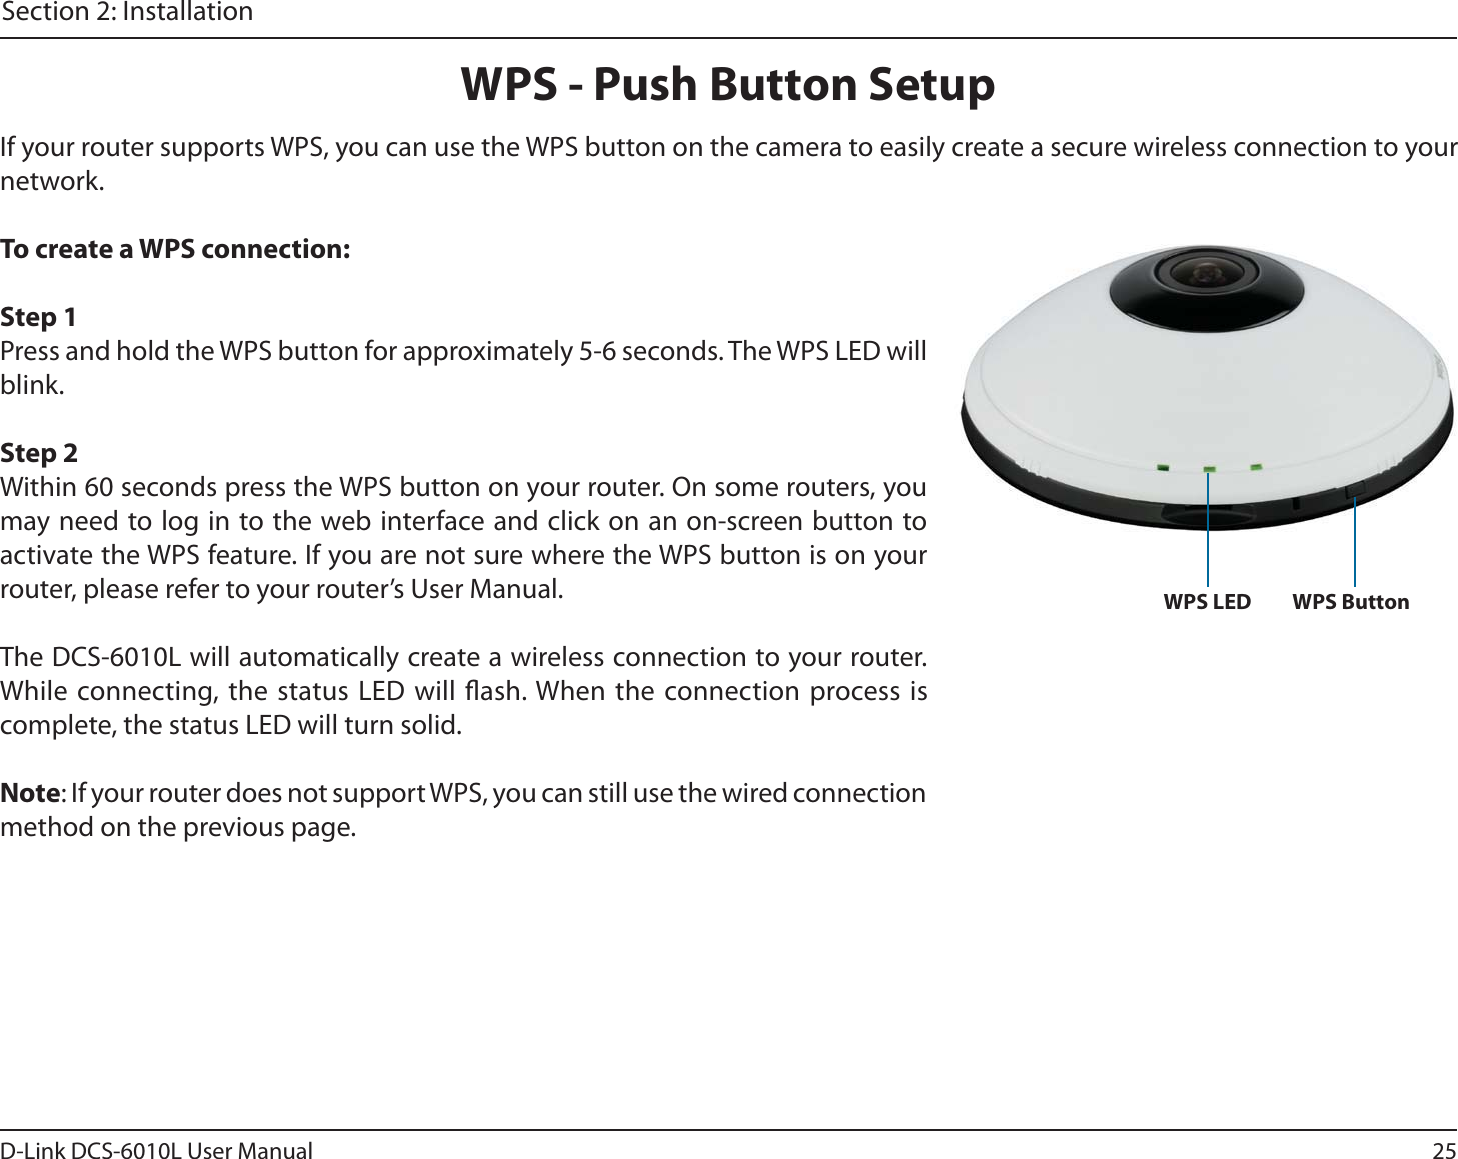 25D-Link DCS-6010L User ManualSection 2: InstallationWPS - Push Button SetupIf your router supports WPS, you can use the WPS button on the camera to easily create a secure wireless connection to your network.To create a WPS connection:Step 1Press and hold the WPS button for approximately 5-6 seconds. The WPS LED will blink.Step 2Within 60 seconds press the WPS button on your router. On some routers, you may need to log in to the web interface and click on an on-screen button to activate the WPS feature. If you are not sure where the WPS button is on your router, please refer to your router’s User Manual.The DCS-6010L will automatically create a wireless connection to your router. While connecting, the status LED will ash. When the connection process is complete, the status LED will turn solid.Note: If your router does not support WPS, you can still use the wired connection method on the previous page.WPS ButtonWPS LED